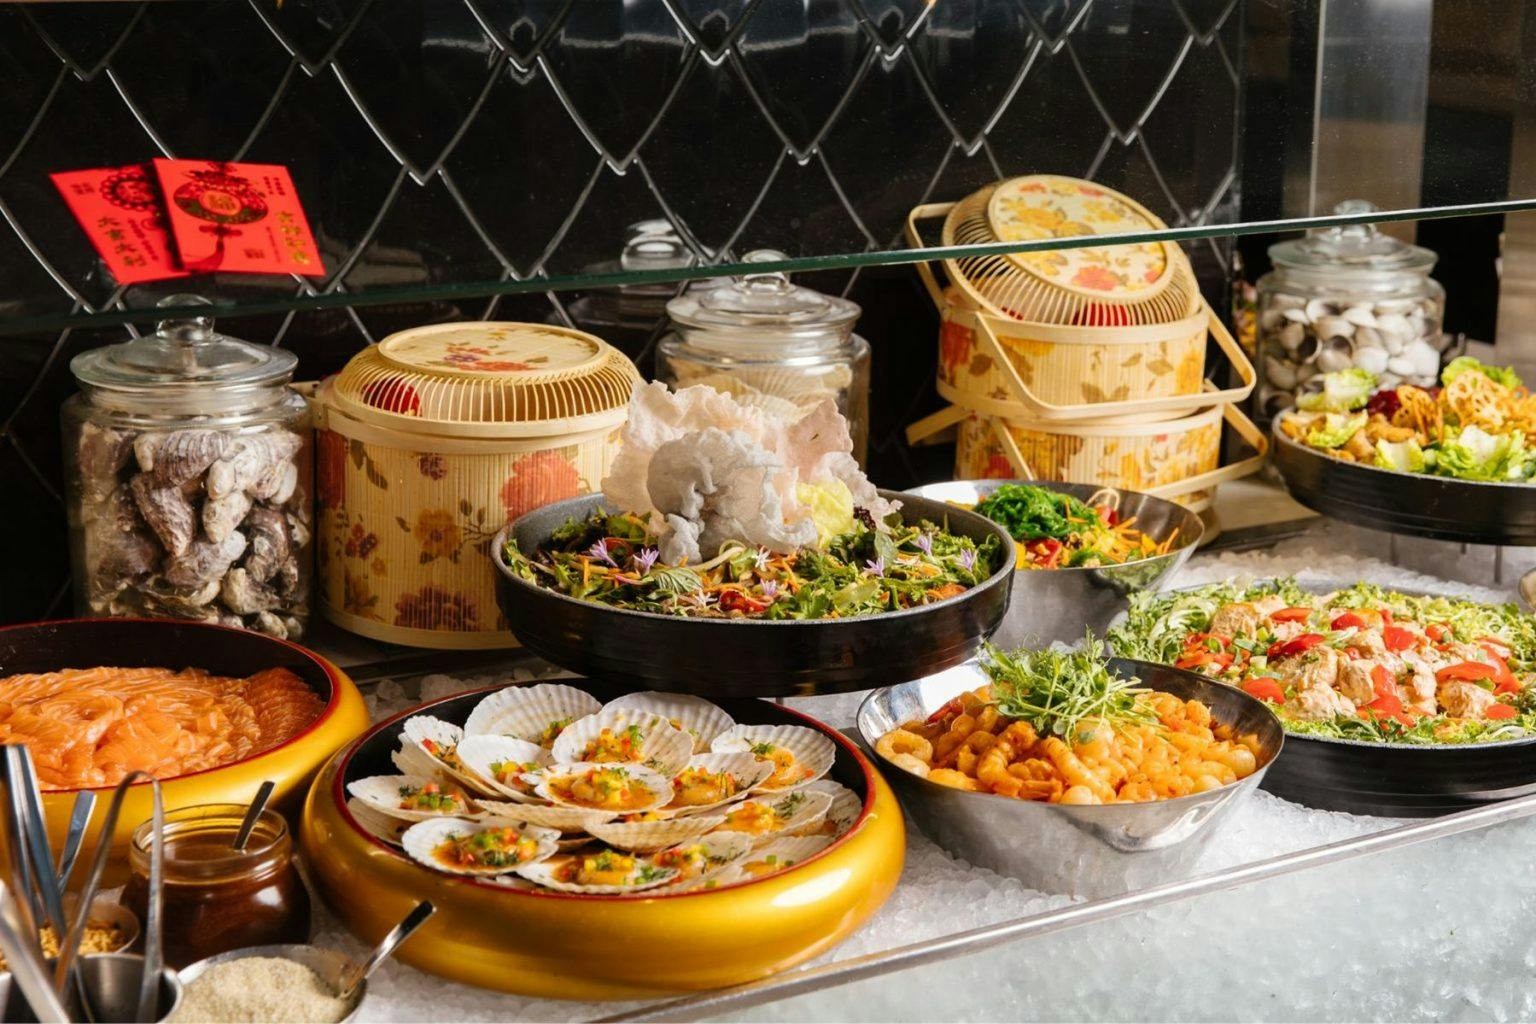 Where to celebrate Lunar New Year Perth, Crown Perth Atrium Buffet Chinese New Year of the Dragon